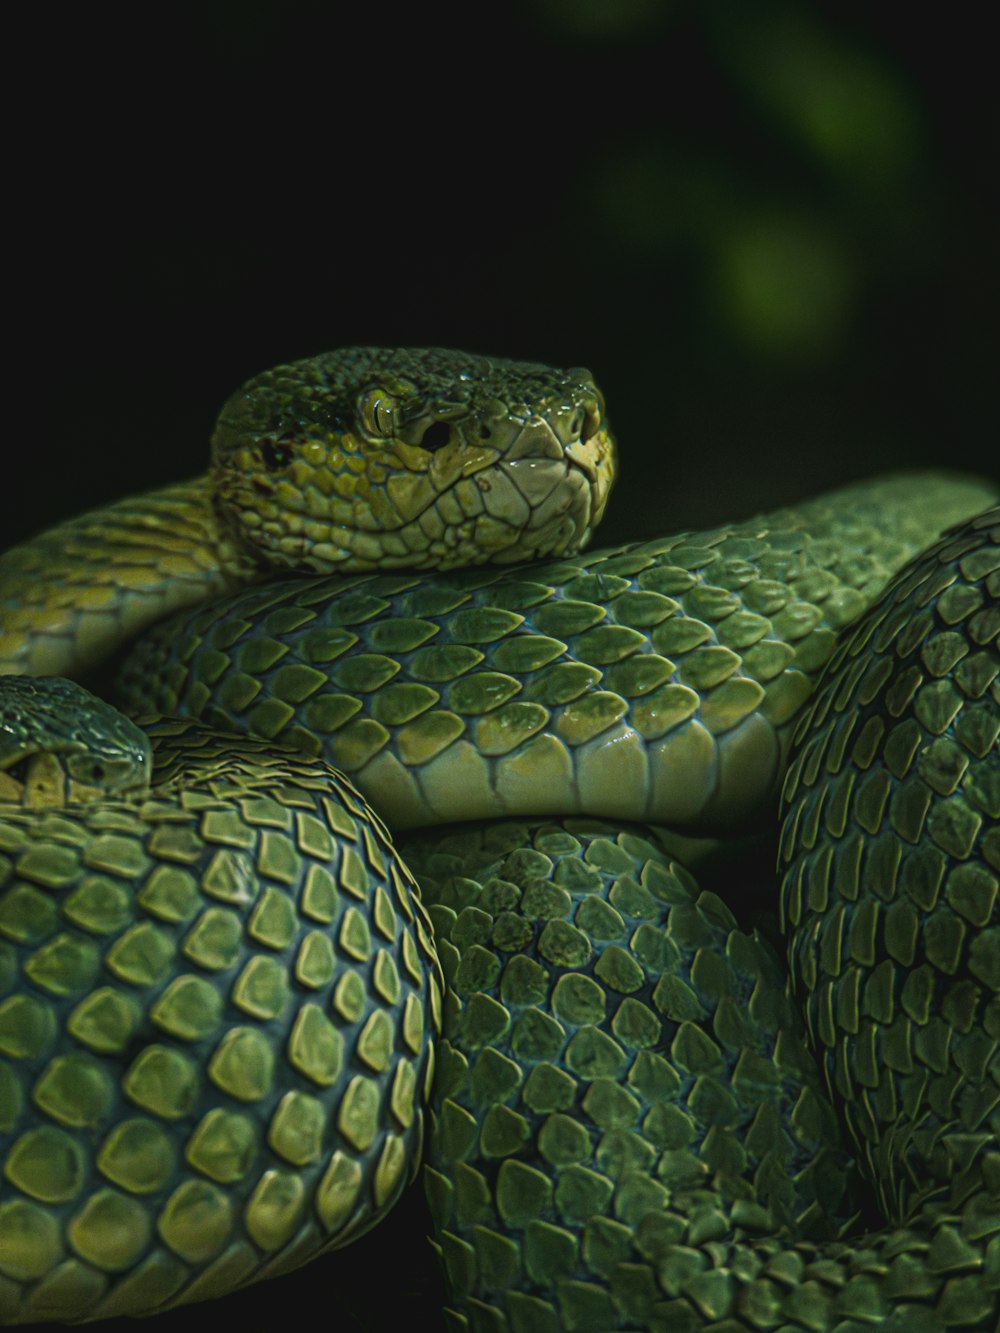 a close up of a green snake on a black background